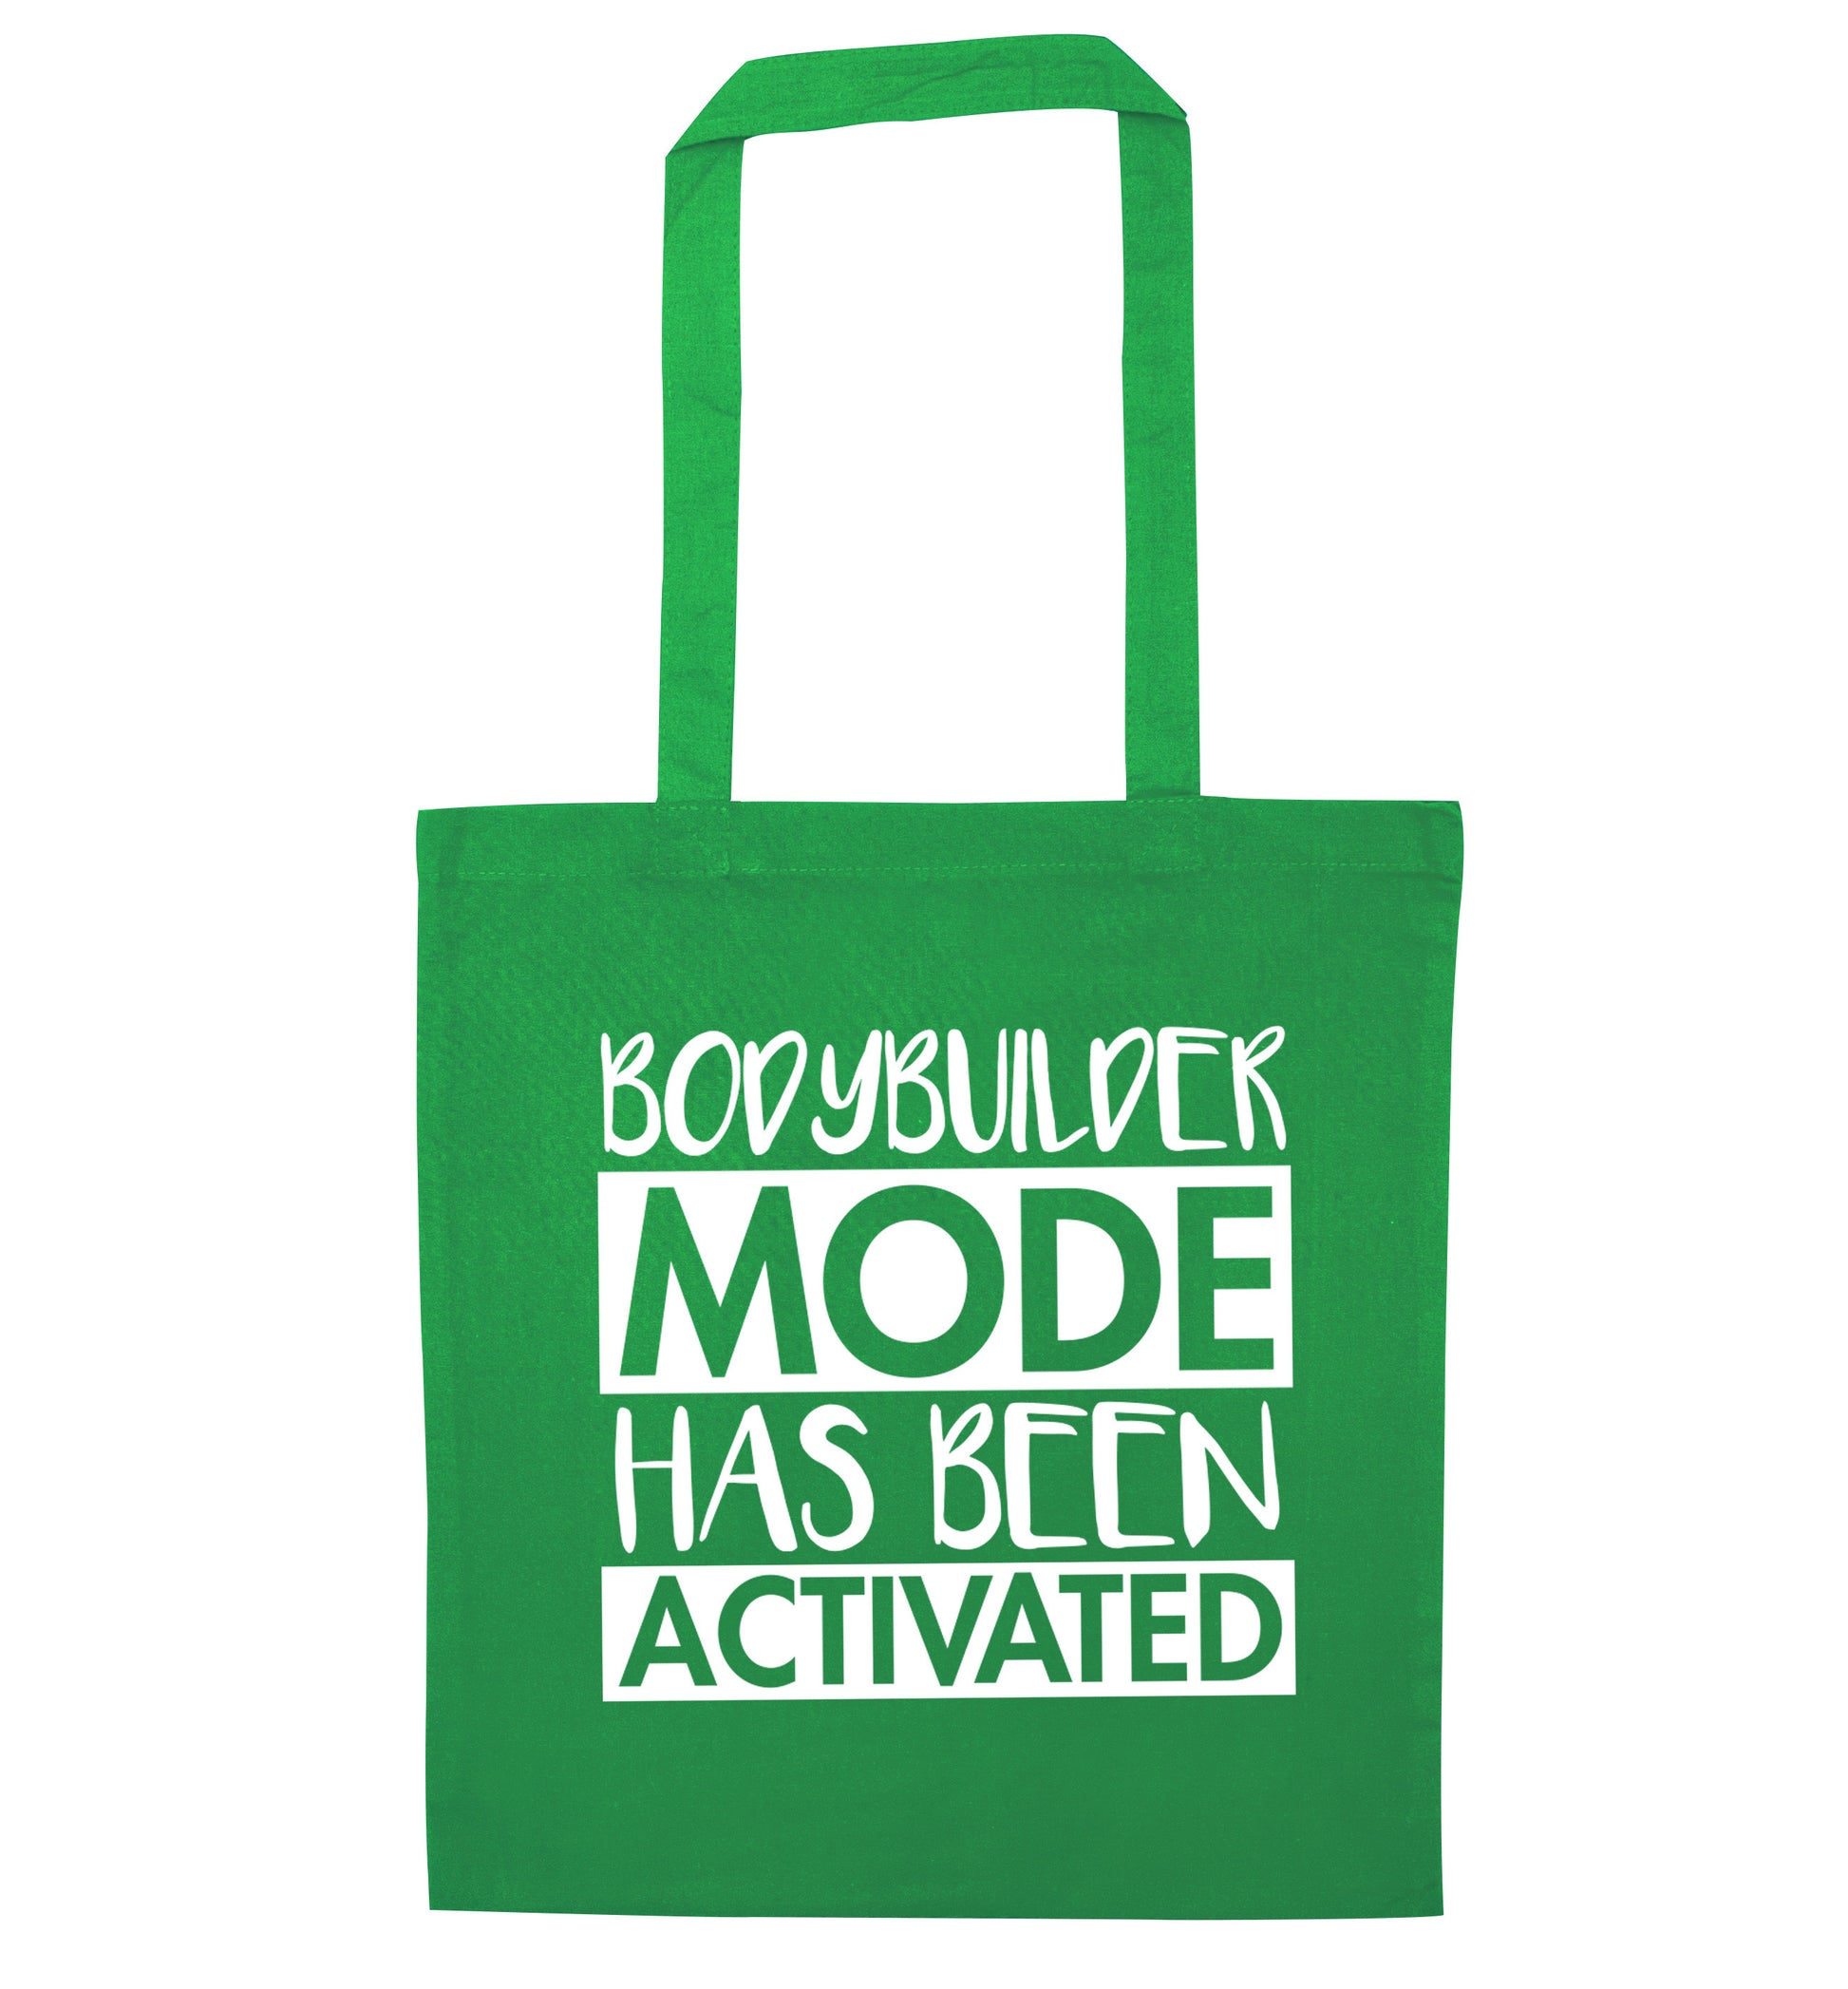 Bodybuilder mode activated green tote bag